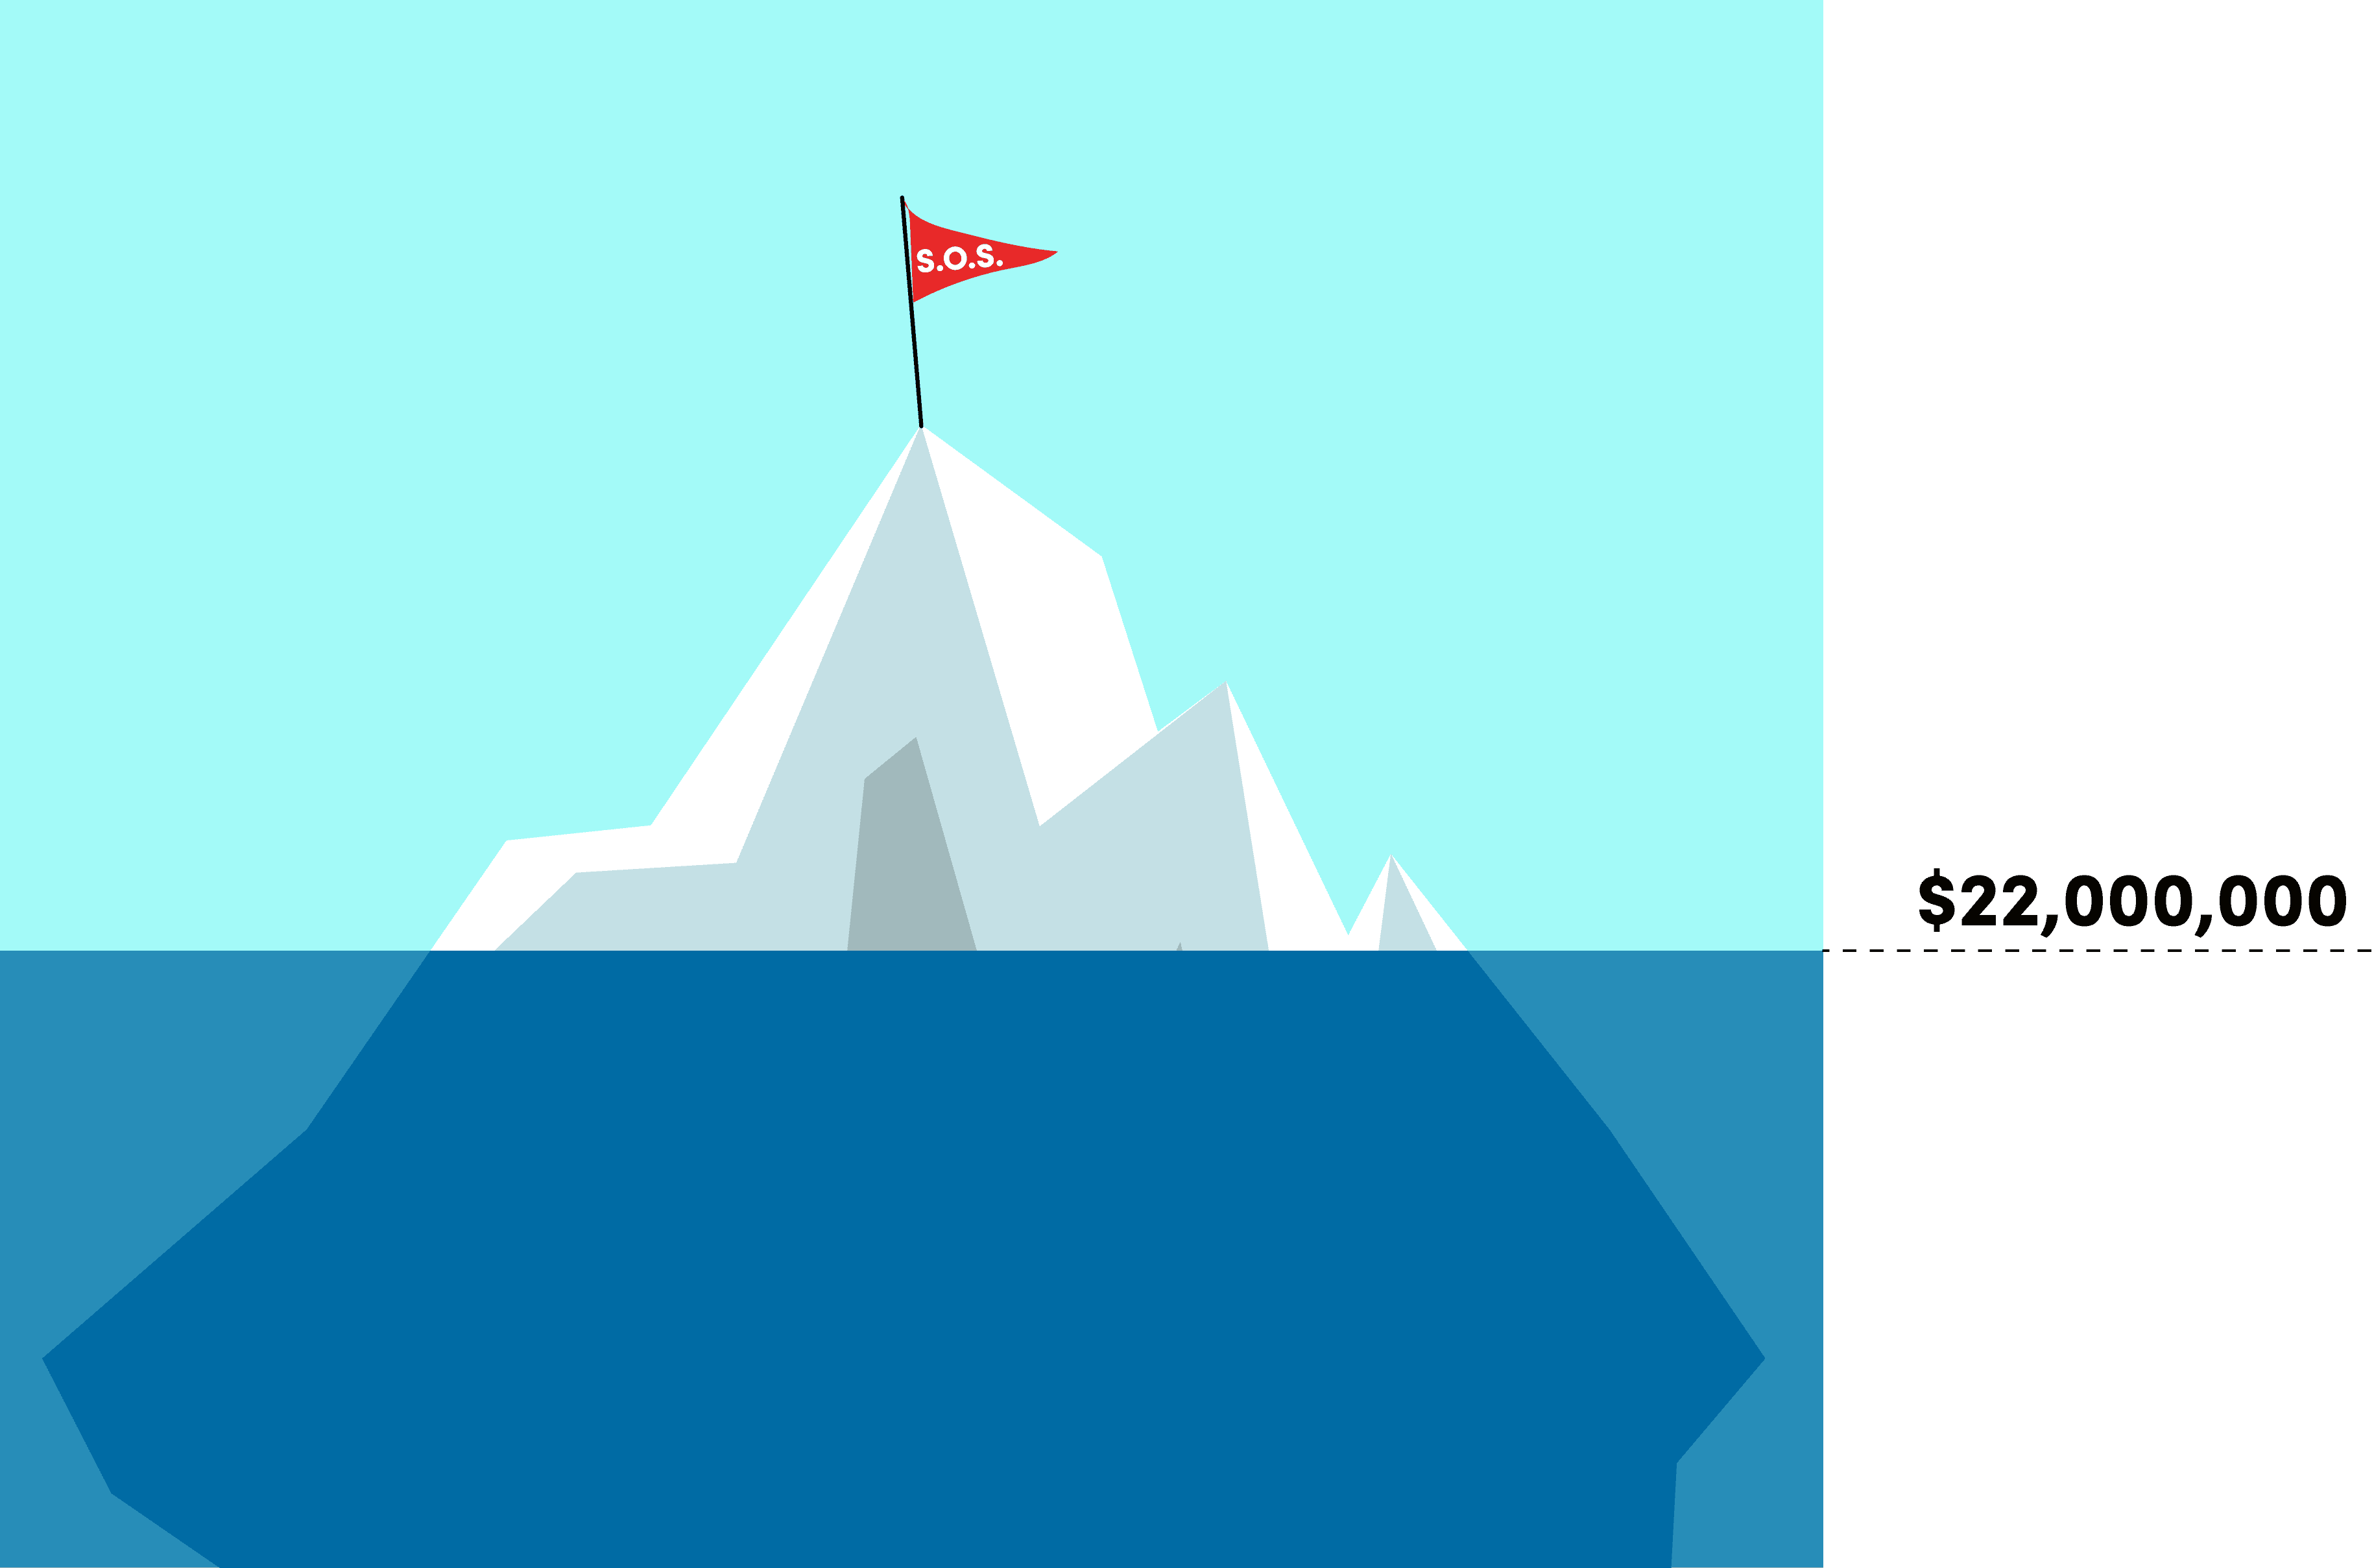 A cartoon of an iceberg, most of which is underwater, and with a small red flag that says "S.O.S." on top. To the right, there's a dotted line at the water level that is labeled as $22,000,000.